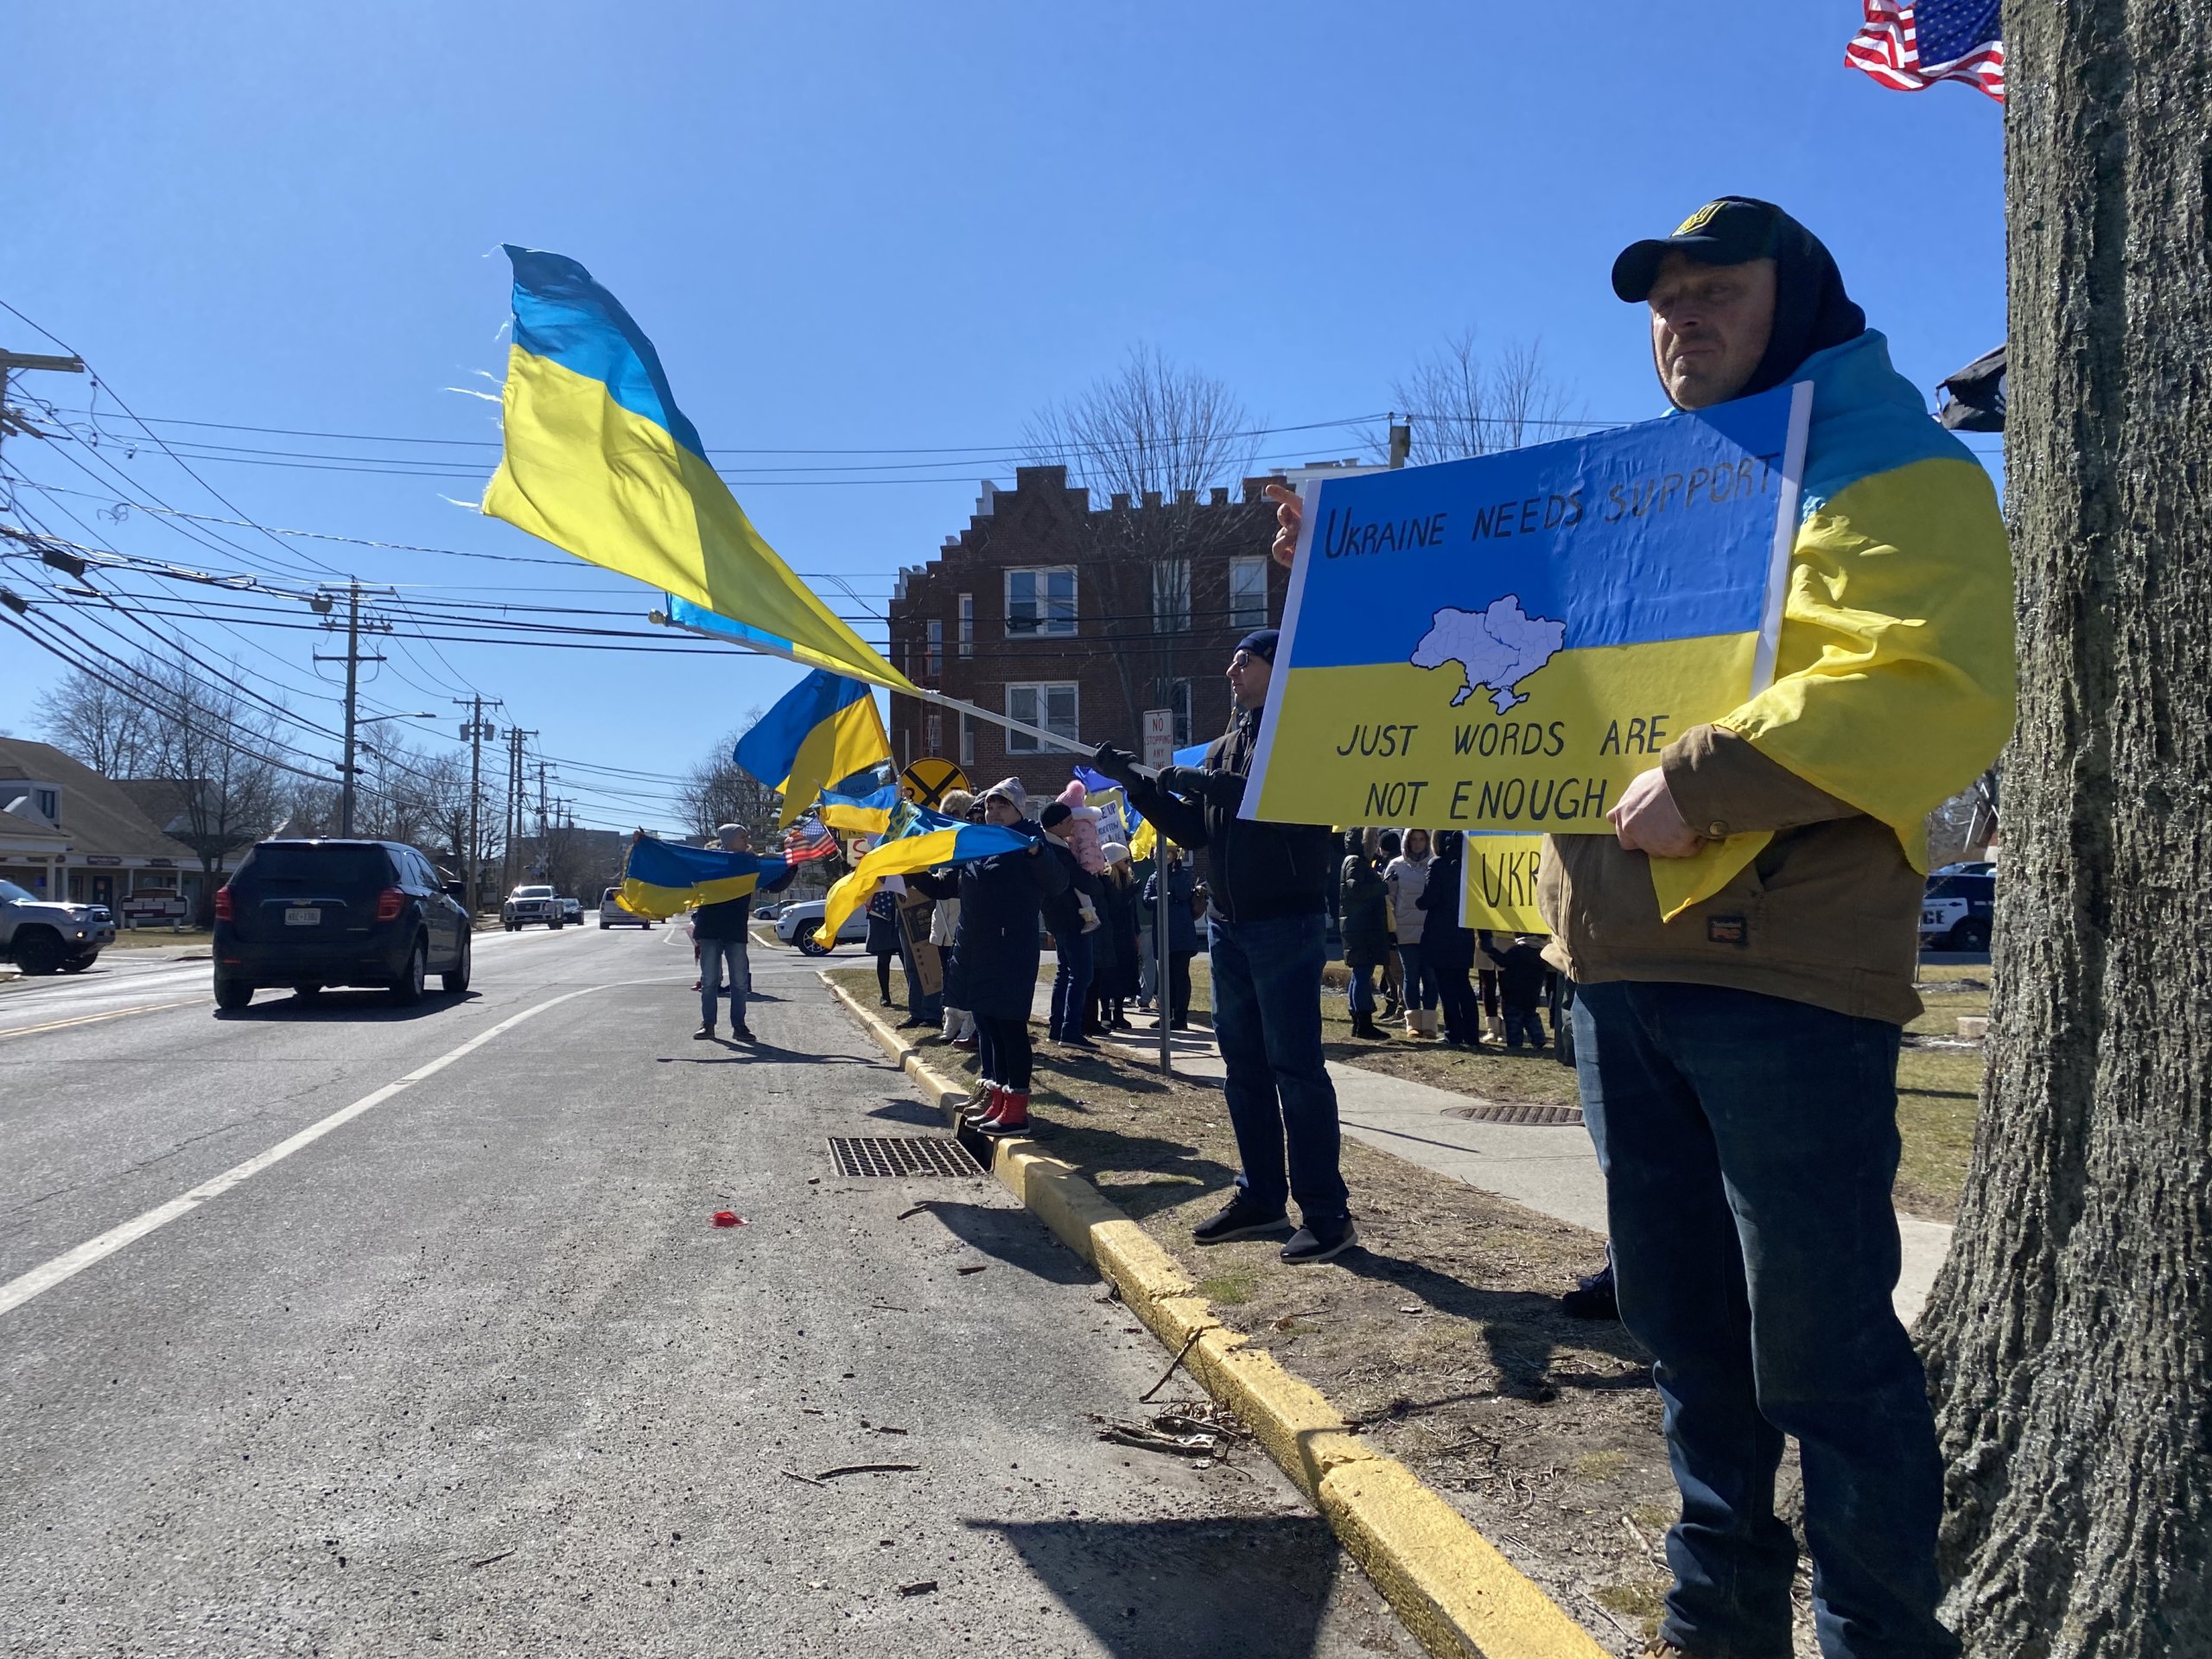 Cars honked in support of the rally for Ukraine in Riverhead